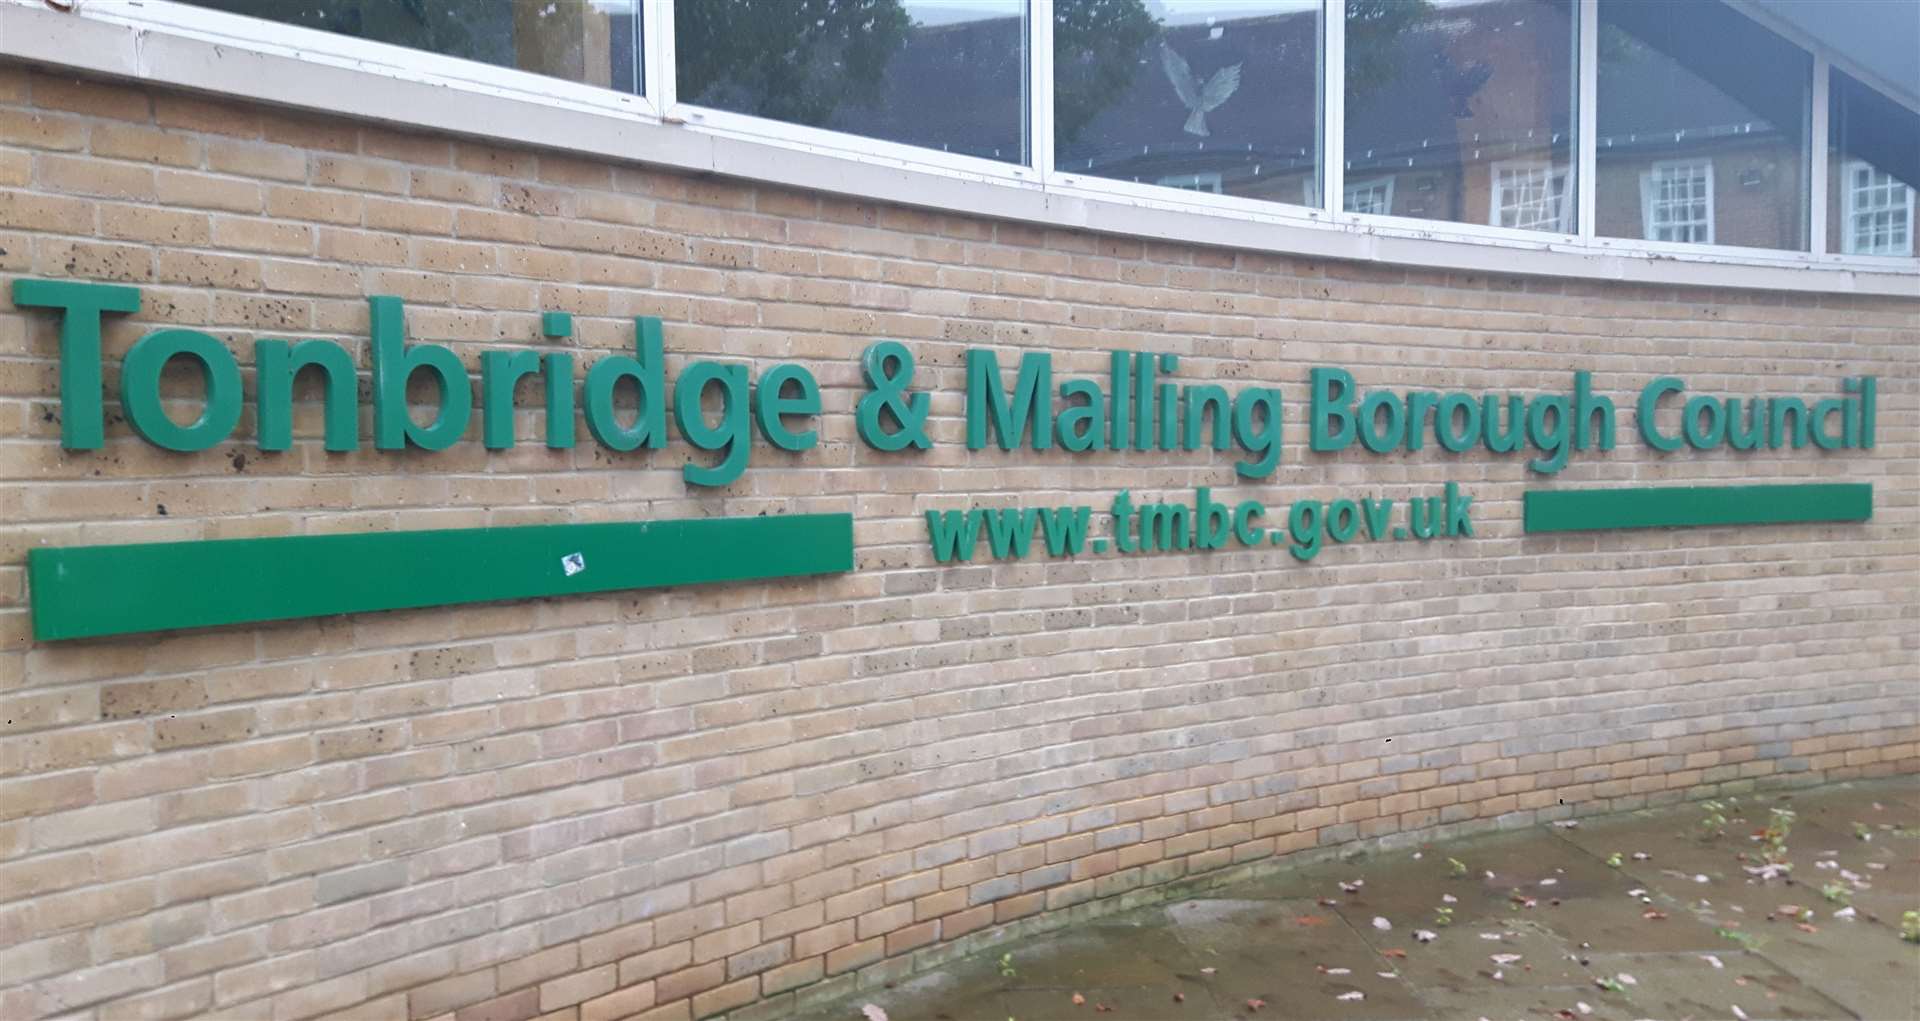 Tonbridge and Malling Council entered the joint-contract with Tunbridge Wells Borough Council in 2019